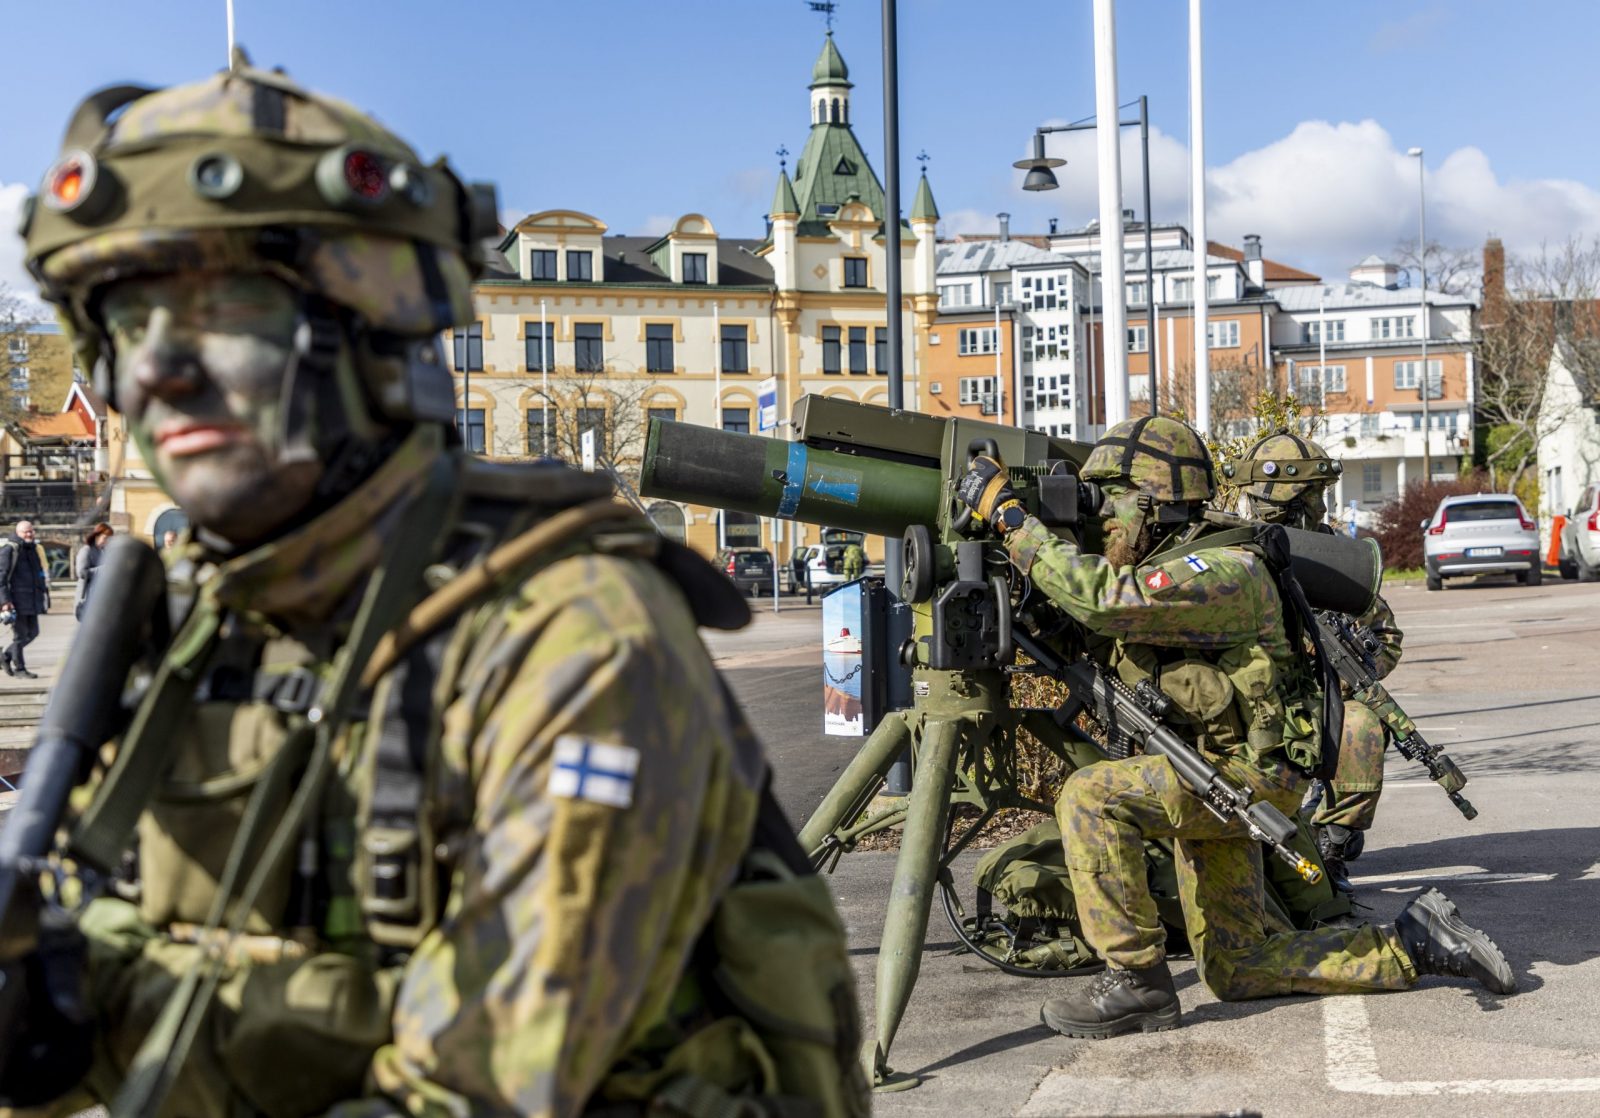 epa10604334 Finnish soldiers take part in the military exercise Aurora 23 in the harbour of Oskarshamn, Sweden, 02 May 2023. The Aurora 23 defense force exercise is being conducted in Sweden from 17 April to 11 May 2023, with the participation of a number of nations (including the USA, Great Britain, Finland, Poland, Portugal, Norway, Estonia, Latvia, Lithuania, Ukraine, Denmark, Austria, Germany and France).  EPA/ADAM IHSE SWEDEN OUT